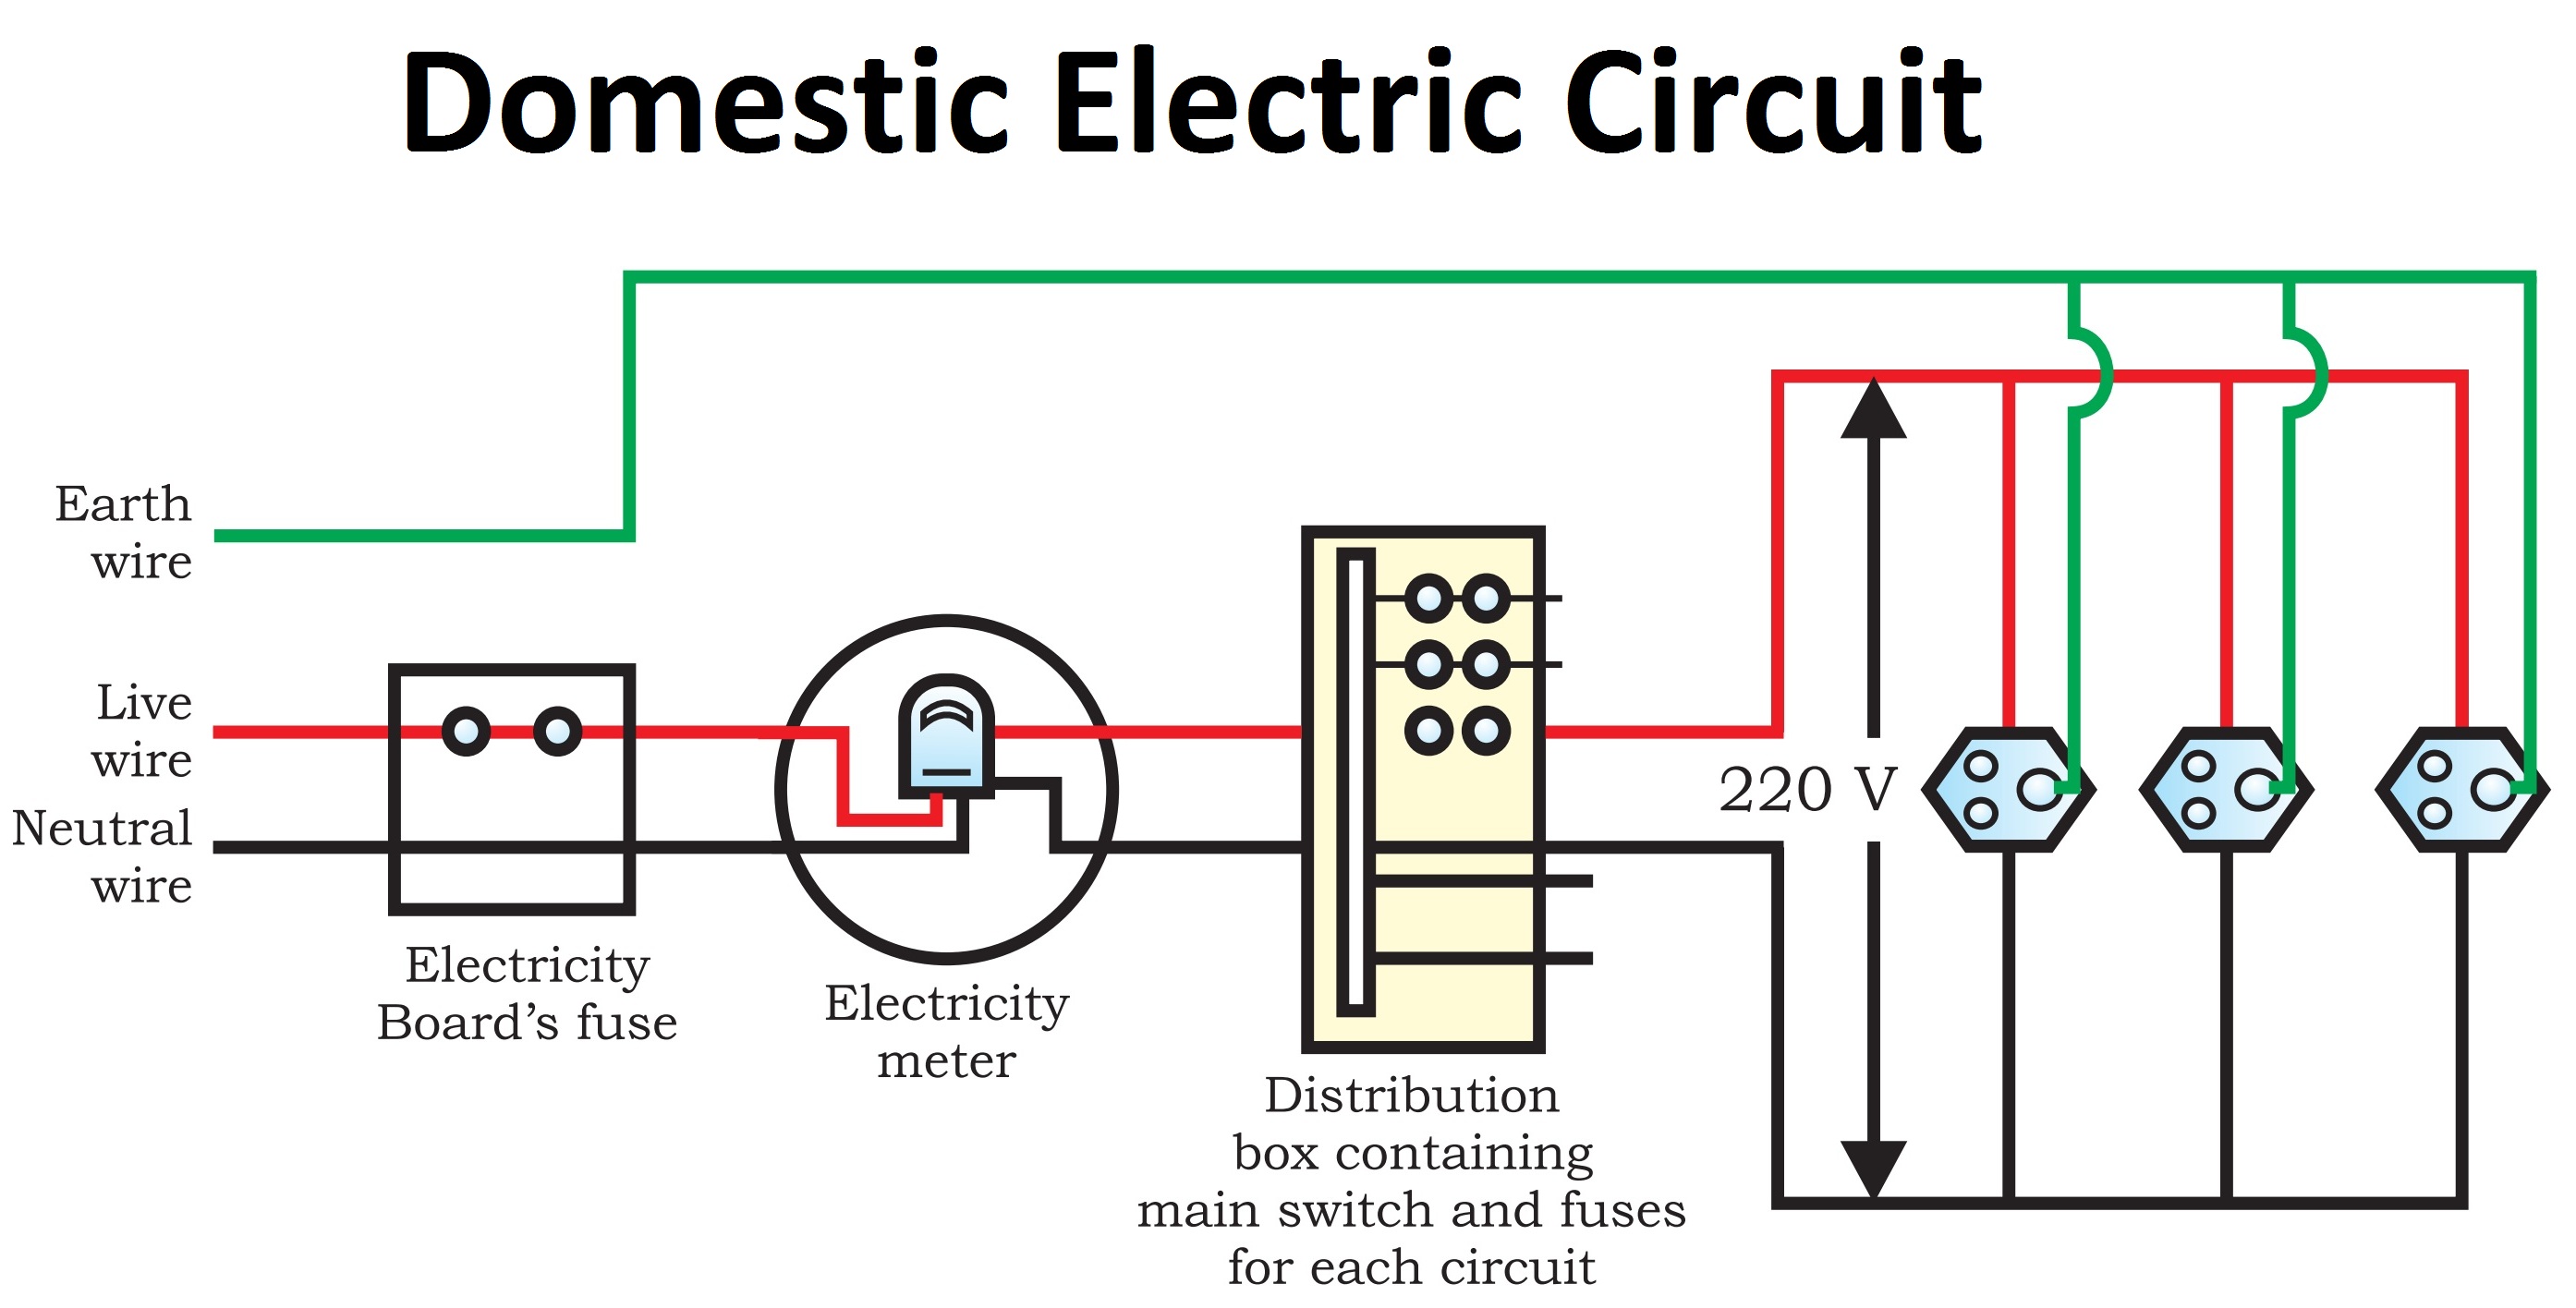 Domestic Electric Circuit - Diagram  Wires  Fuse